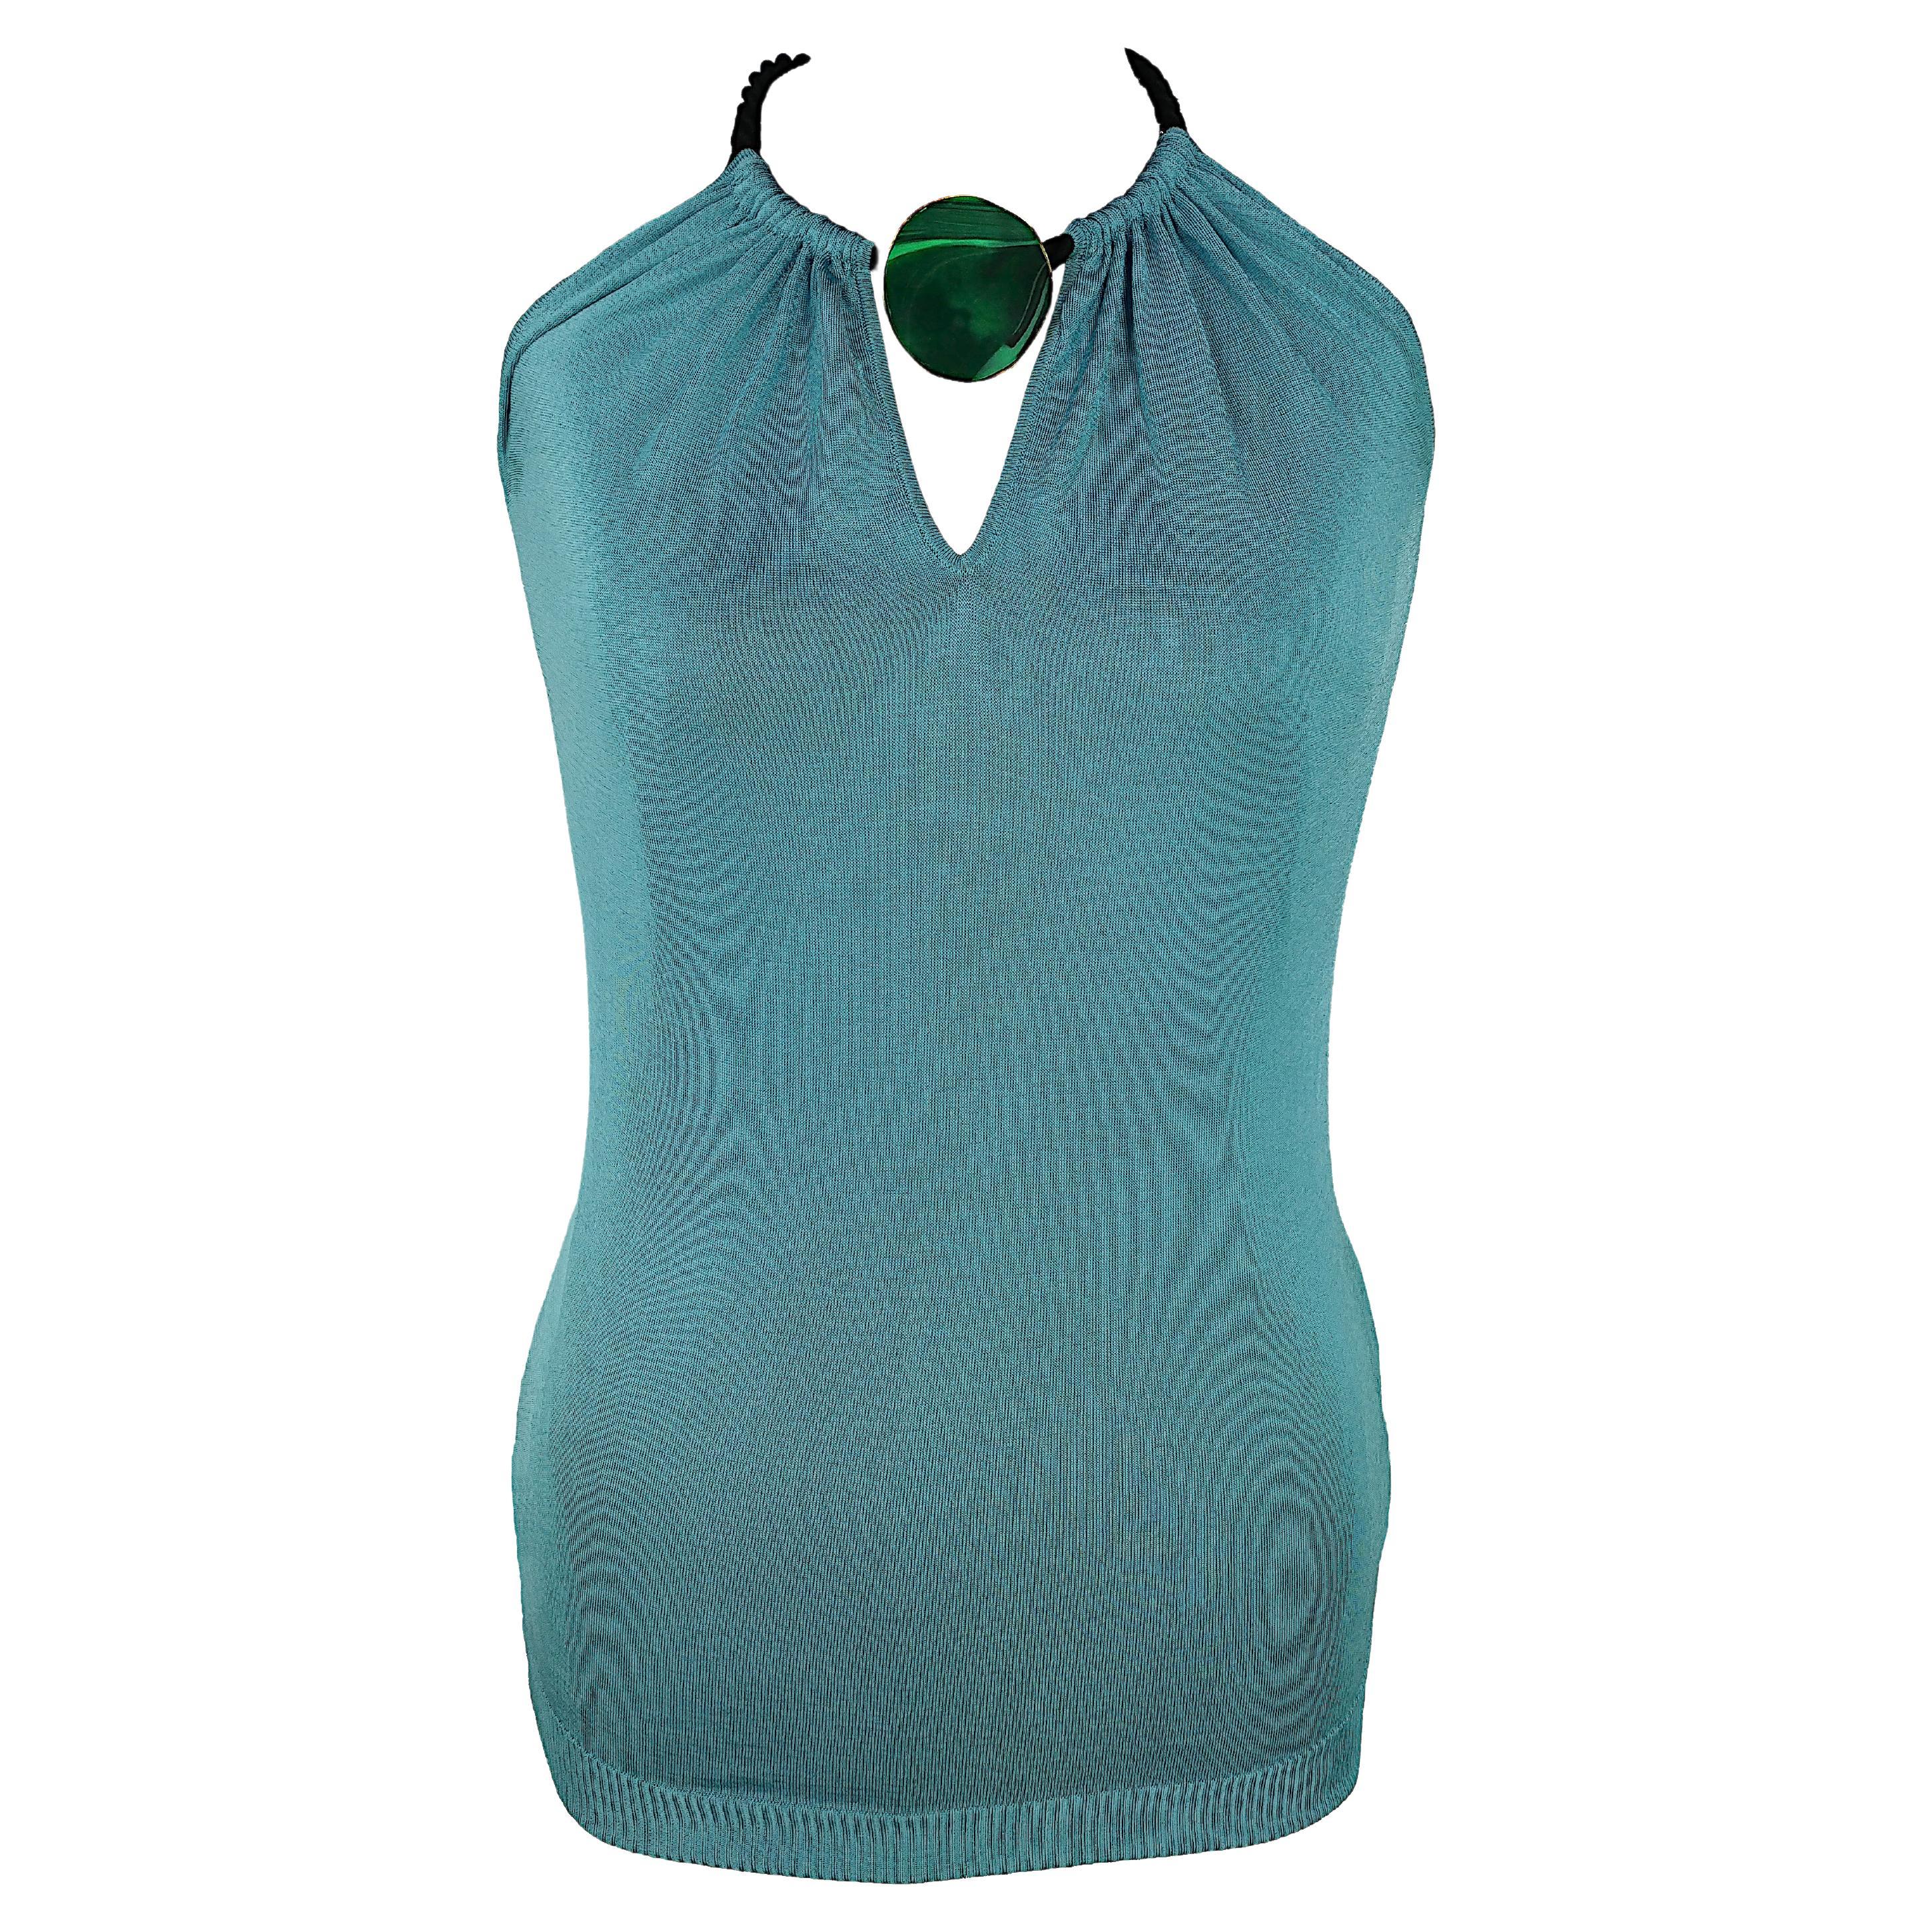 GUCCI - Turquoise Halter Top with Green Stone Medallion | Size L For Sale